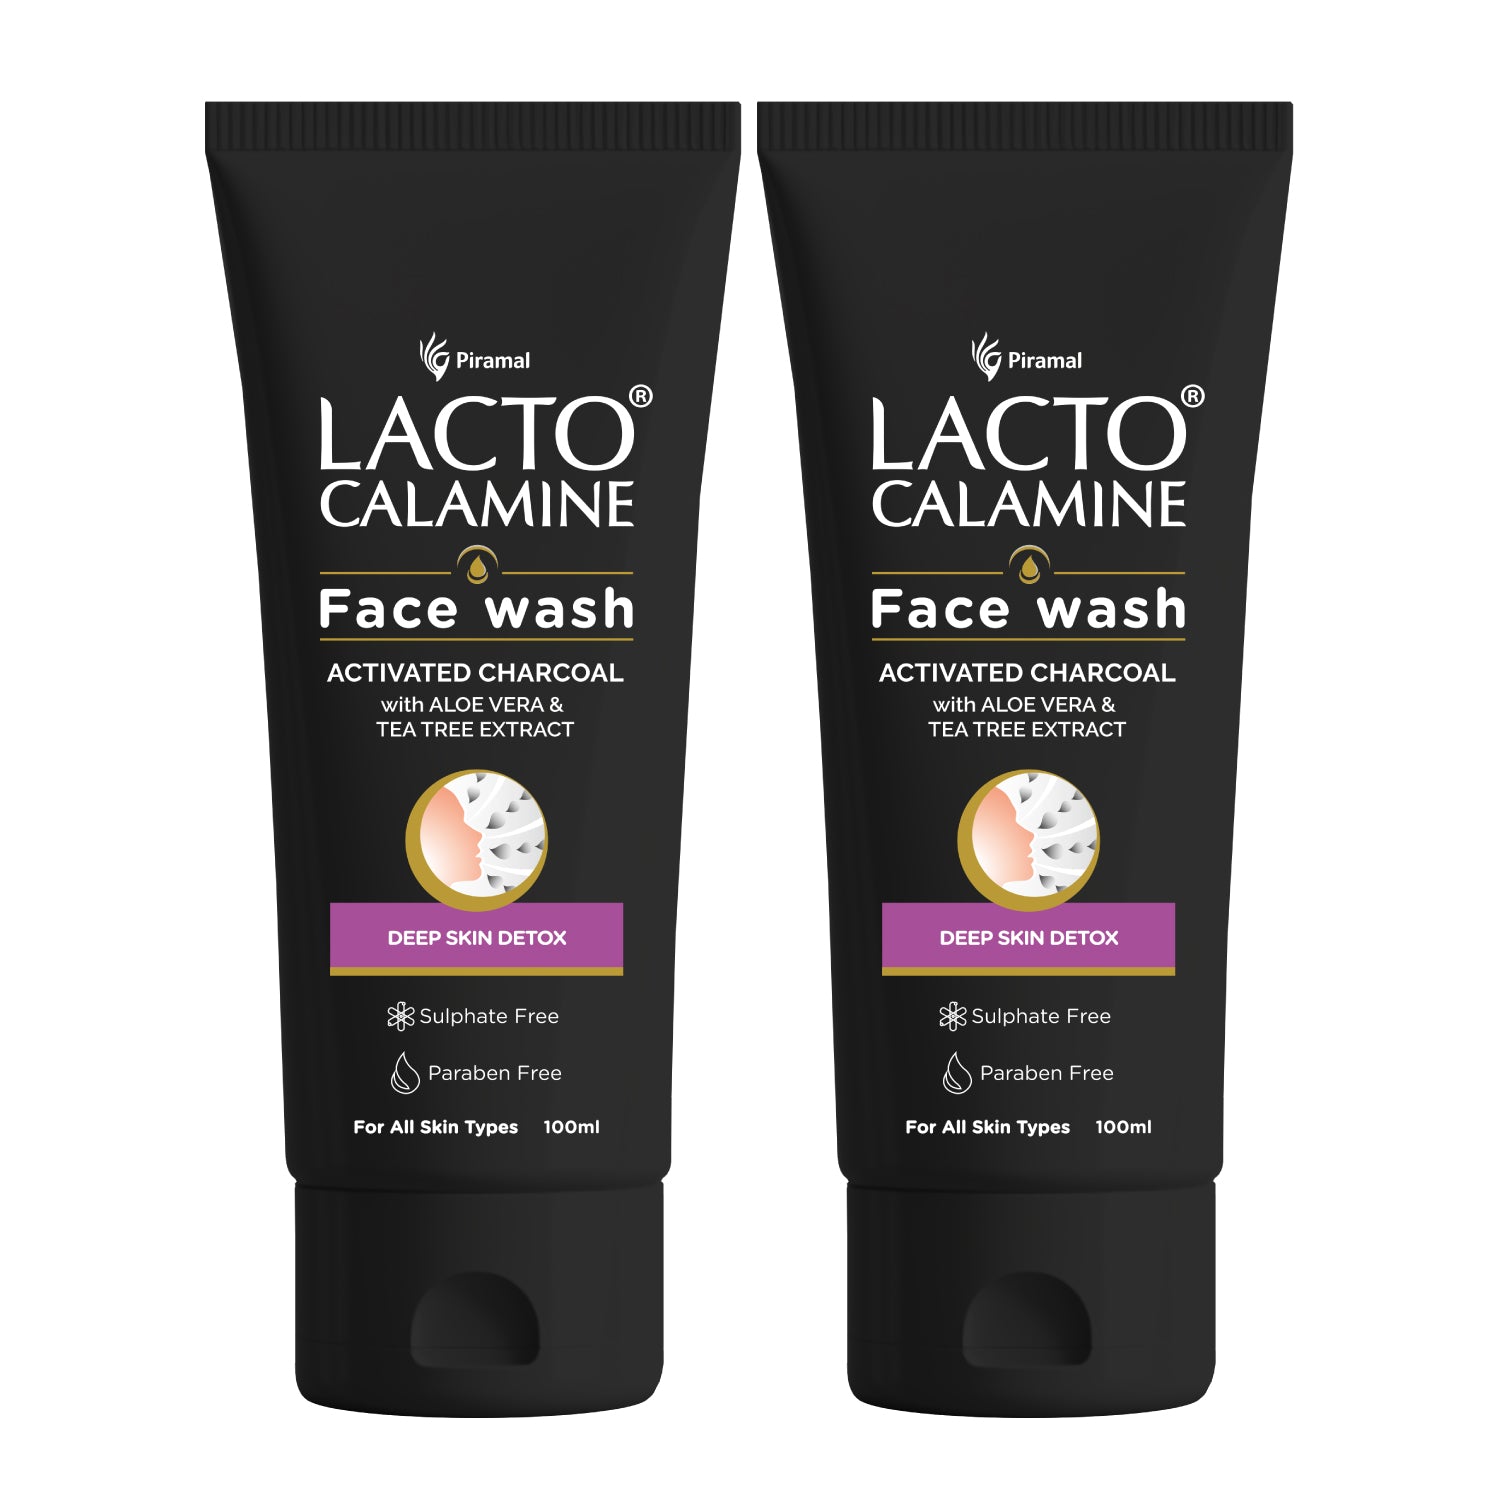 Lacto Calamine Charcoal Face Wash Pack of 2